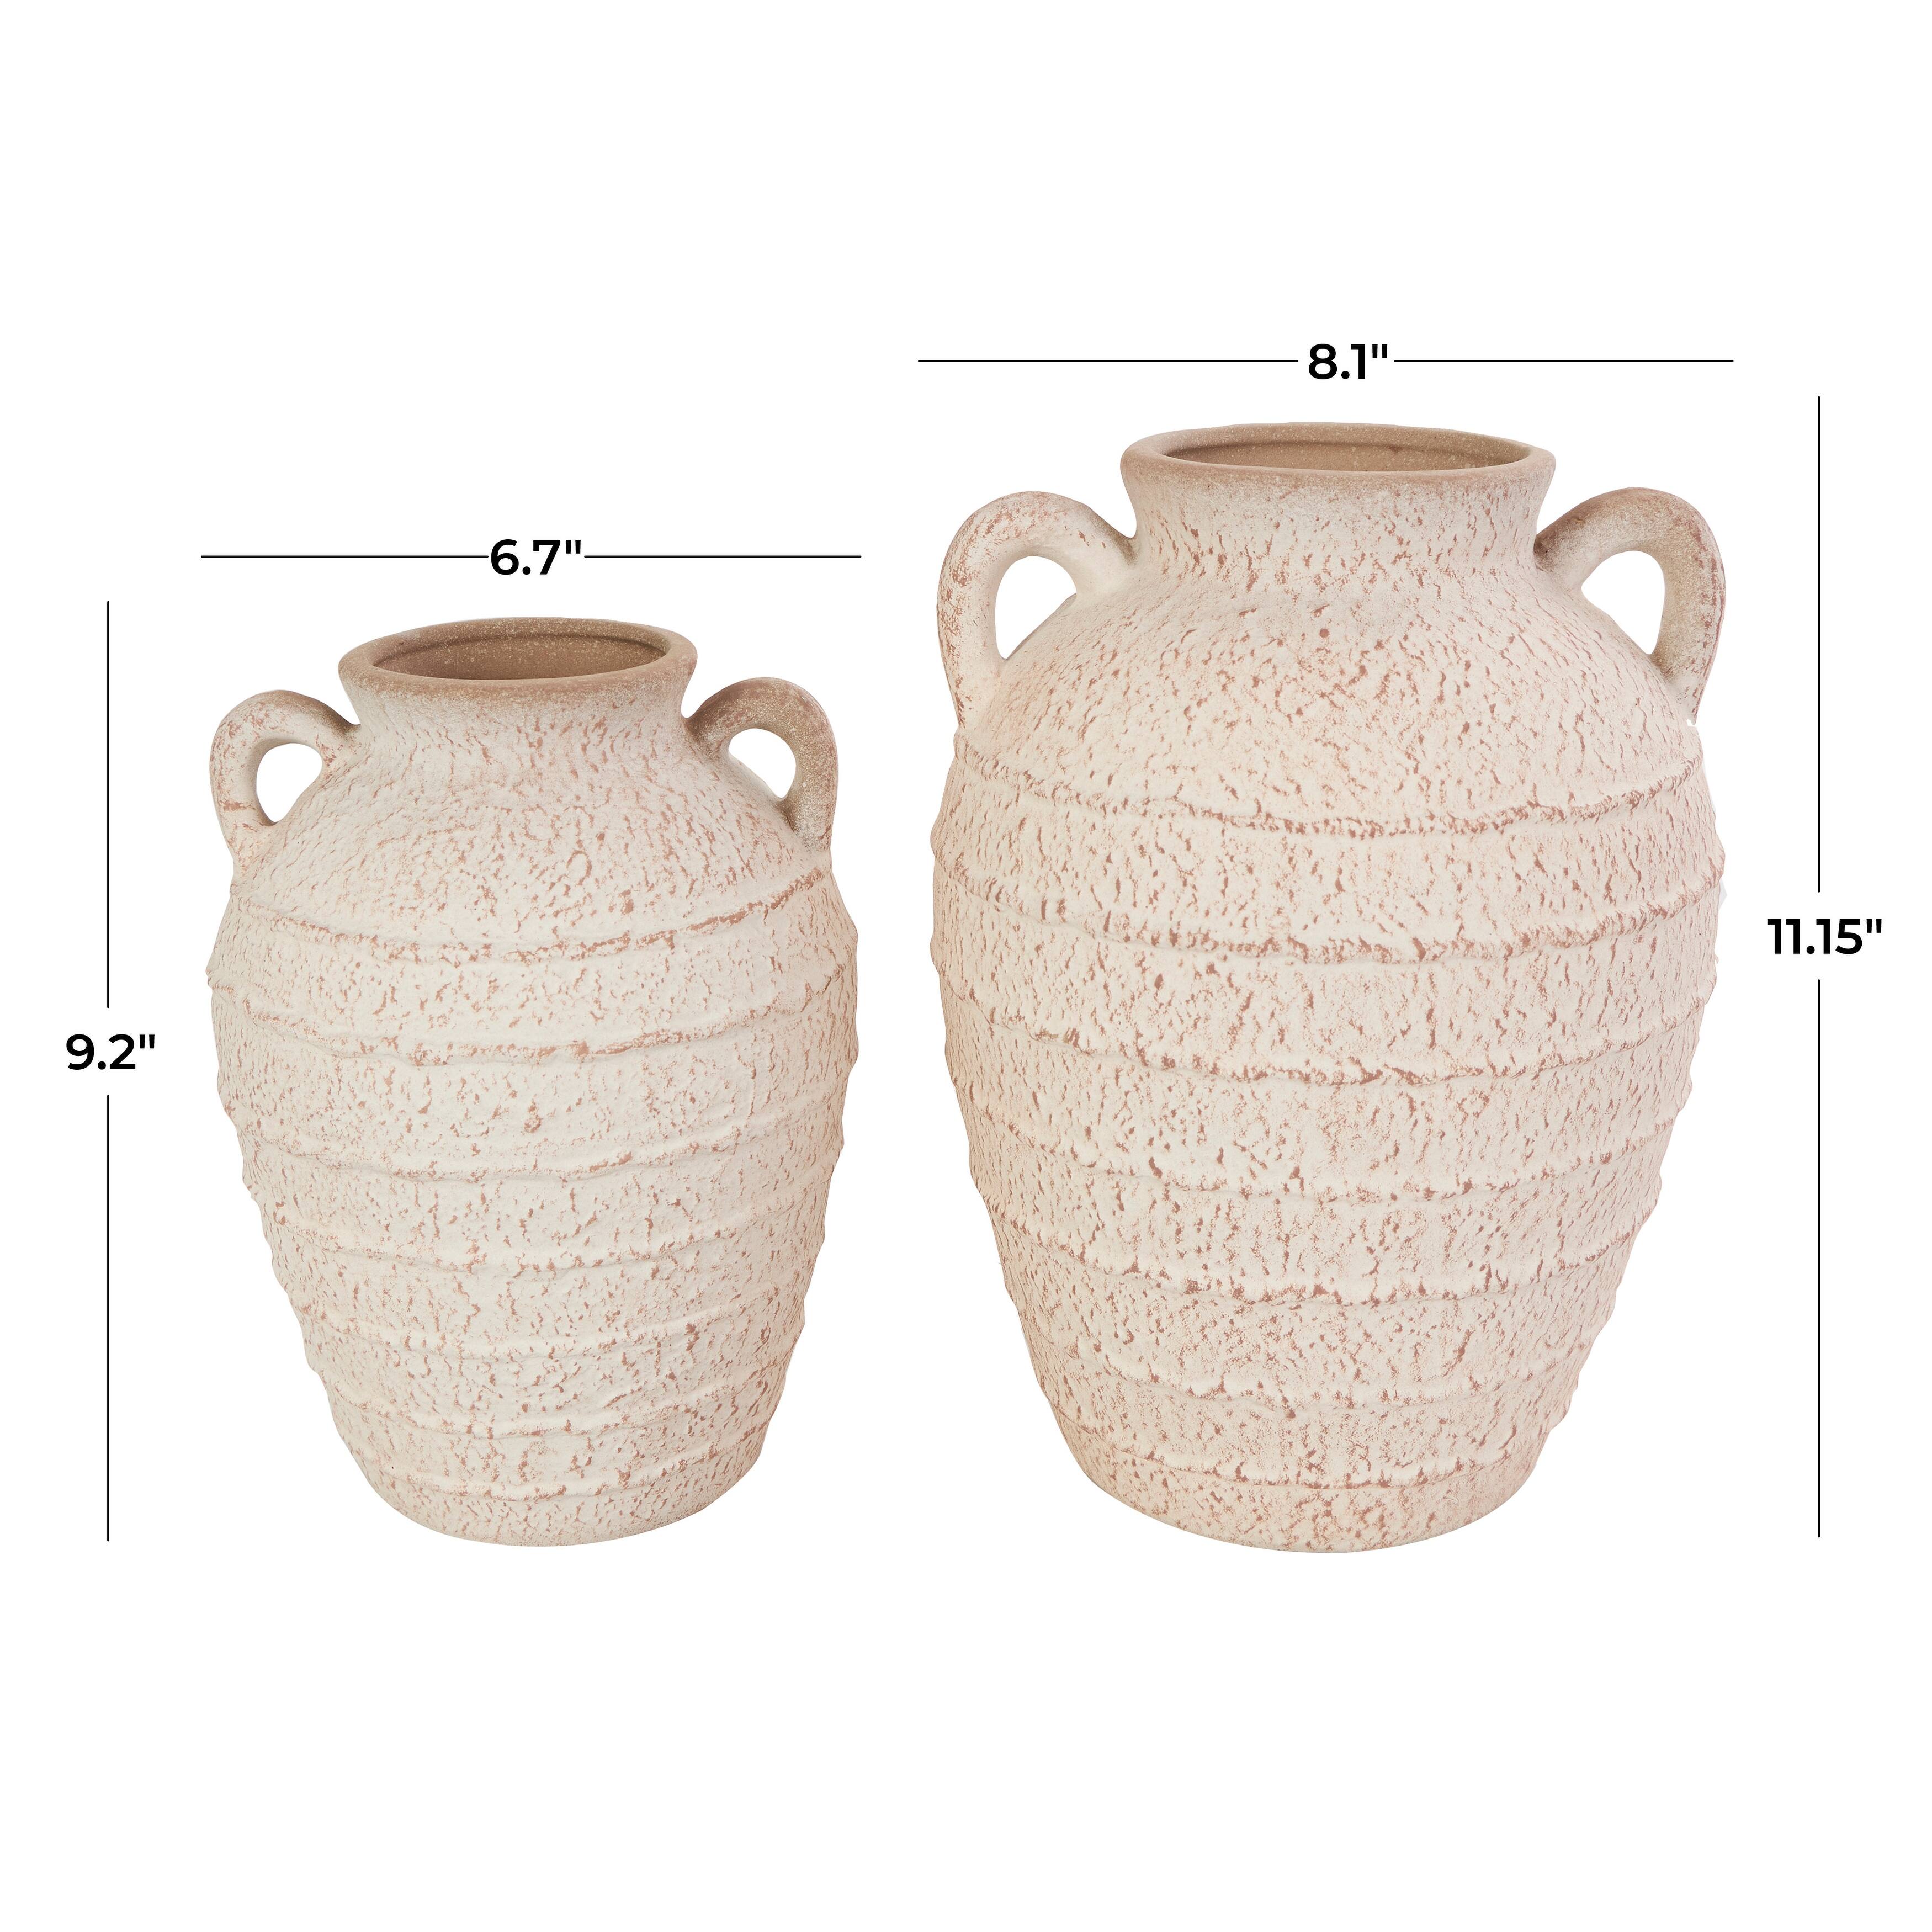 Cream Ceramic Textured Vase with Handles and Terracotta Accents (Set of 2)